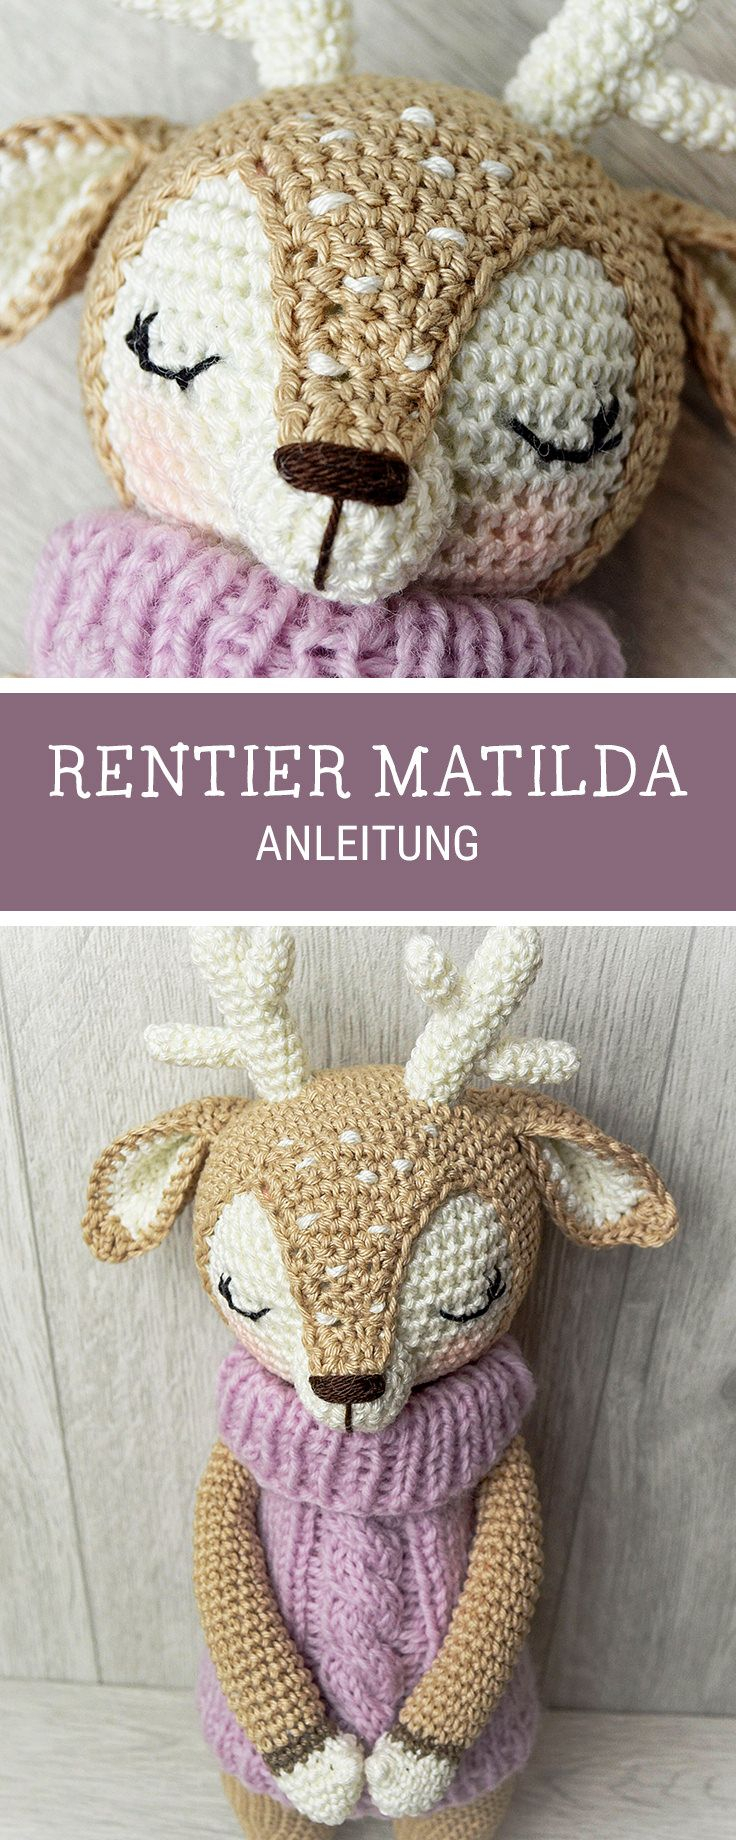 Free Knitting Patterns Download Knitting Patterns For Ba Yarns Pdf Download For The Amigurumi